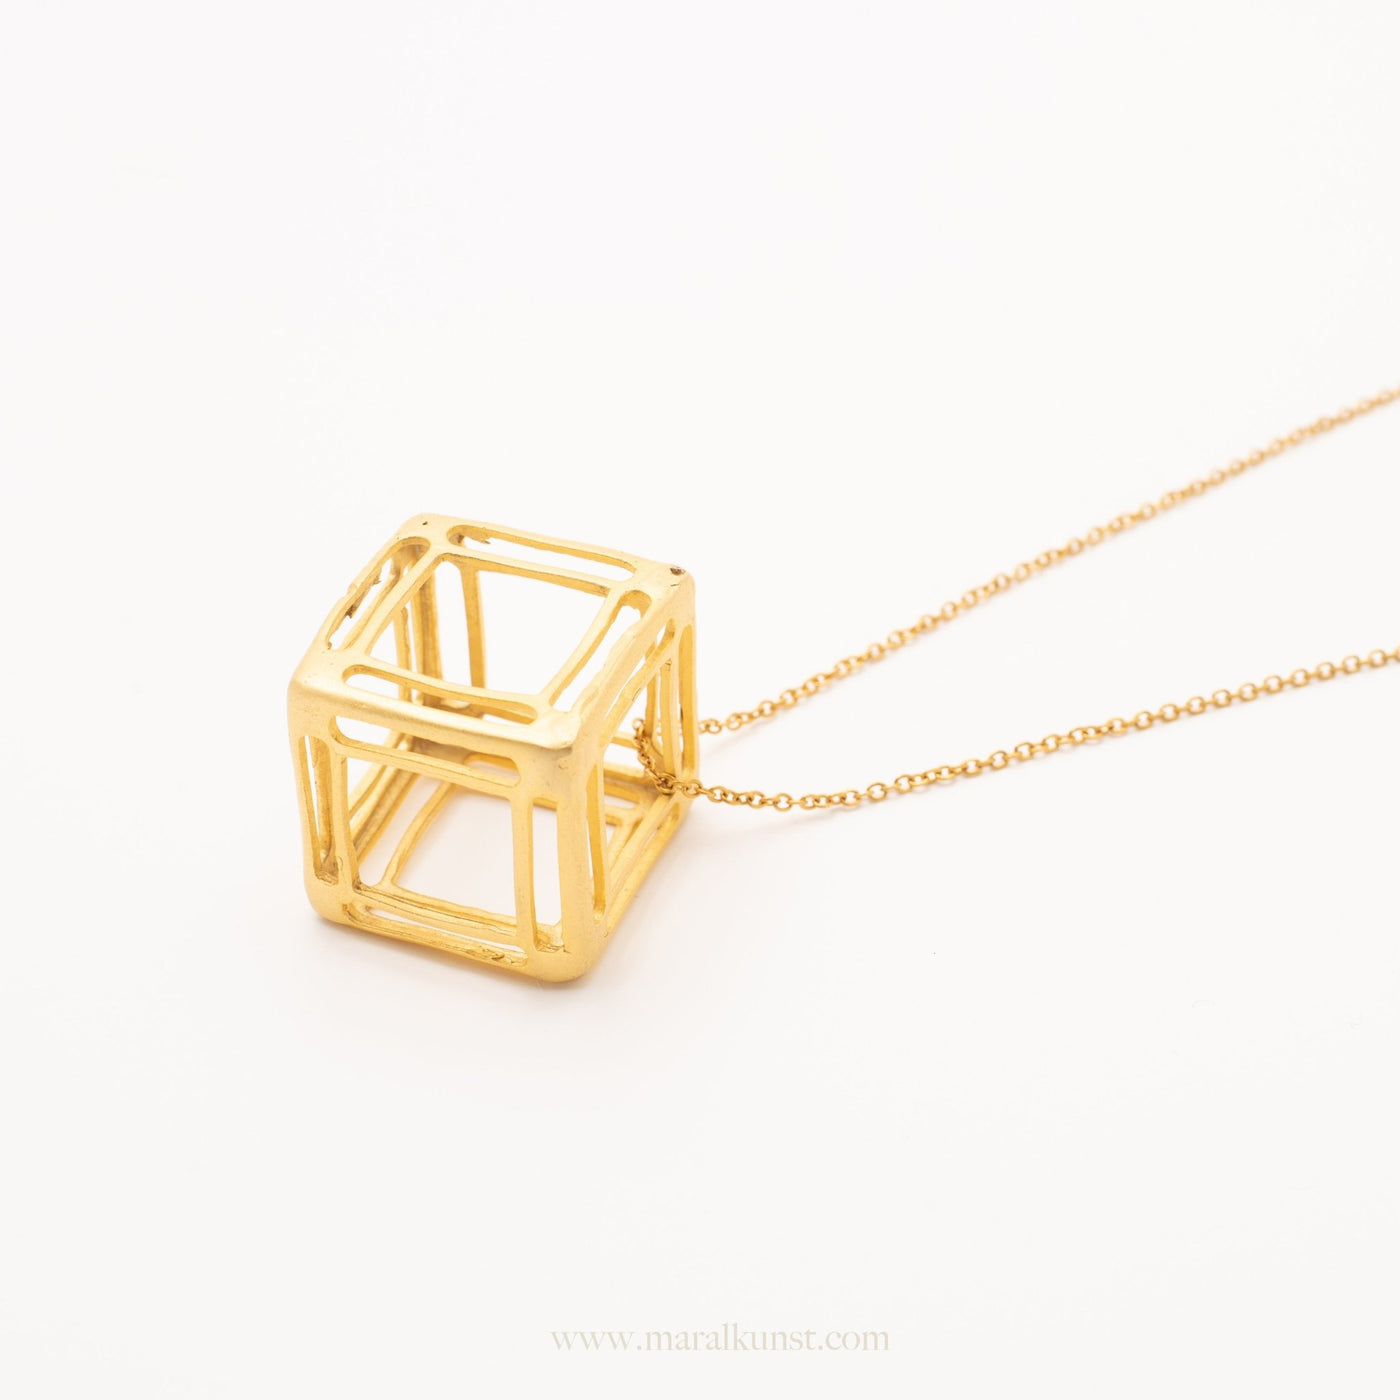 Rubik's Cube Gold Necklace - Maral Kunst Jewelry